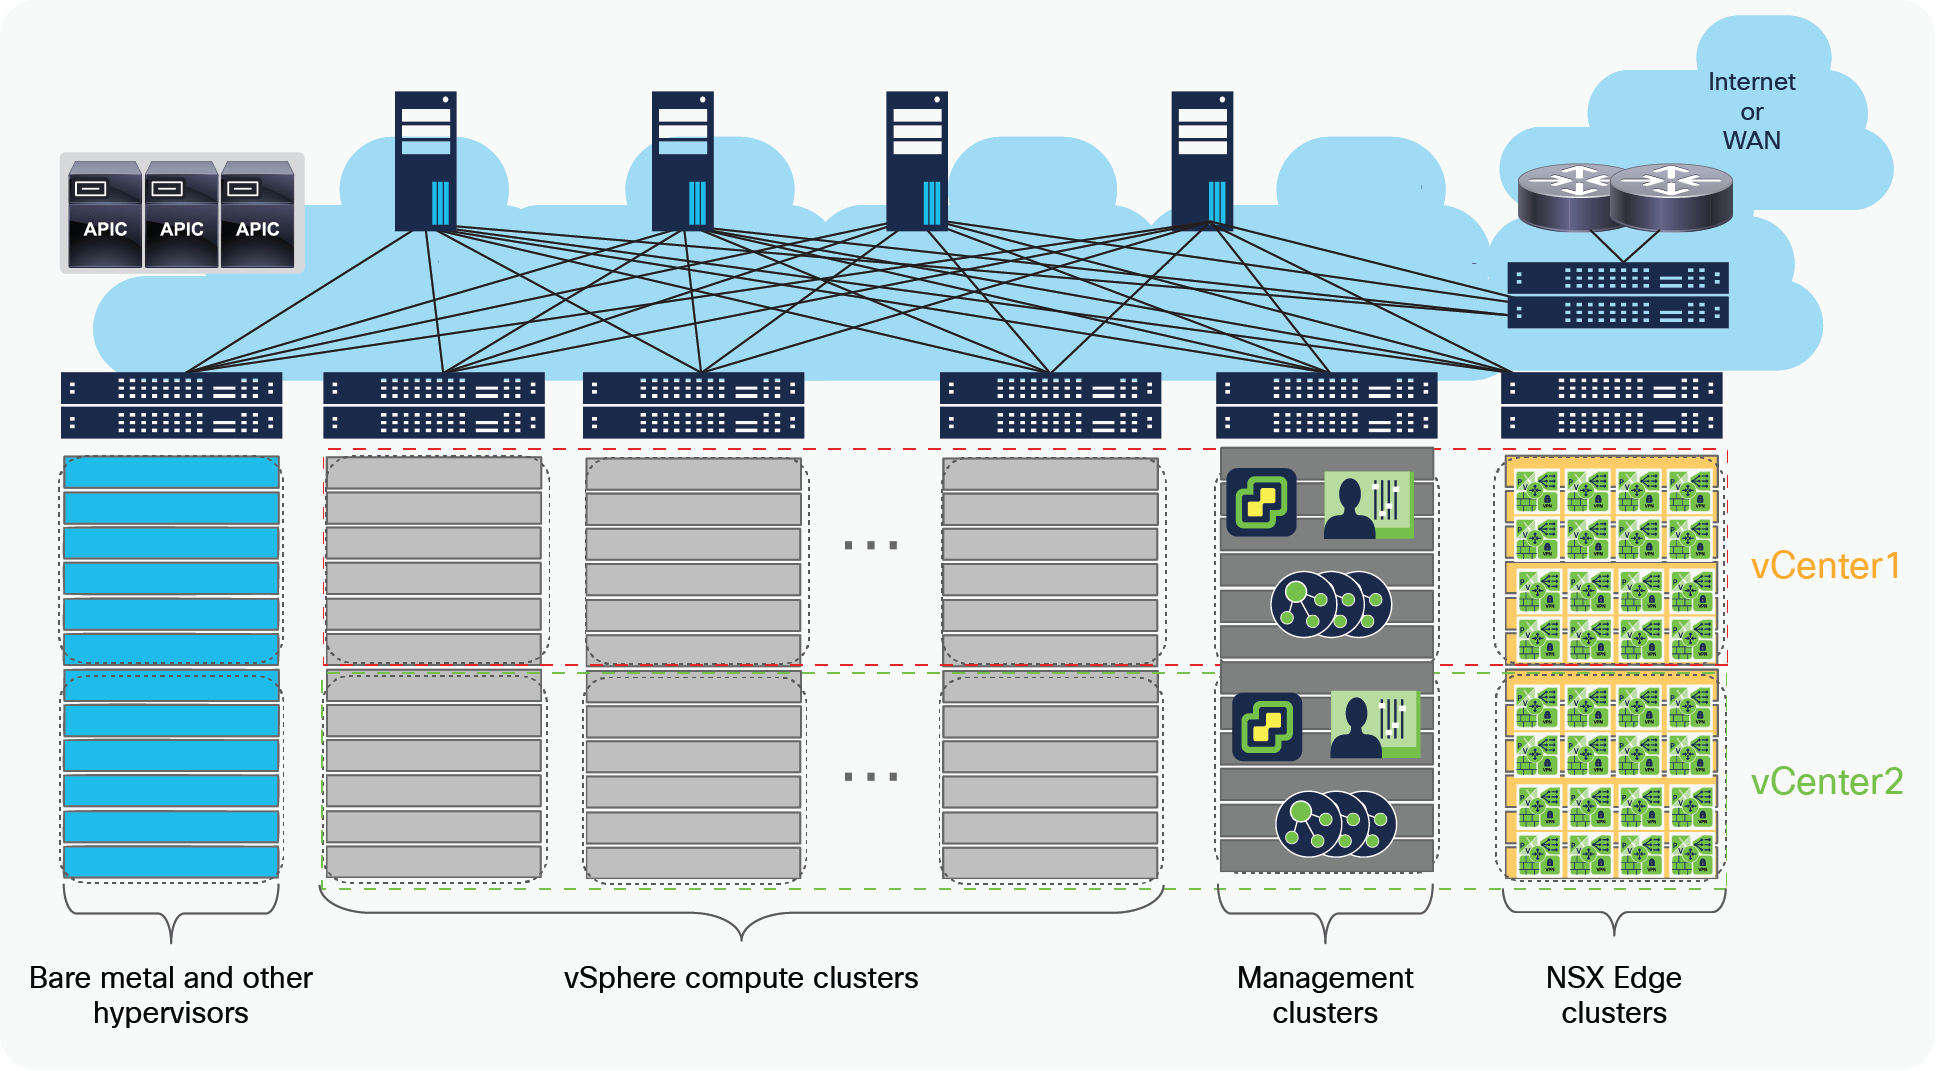 Compute clusters, management cluster, and edge cluster for a multiple vCenter solution